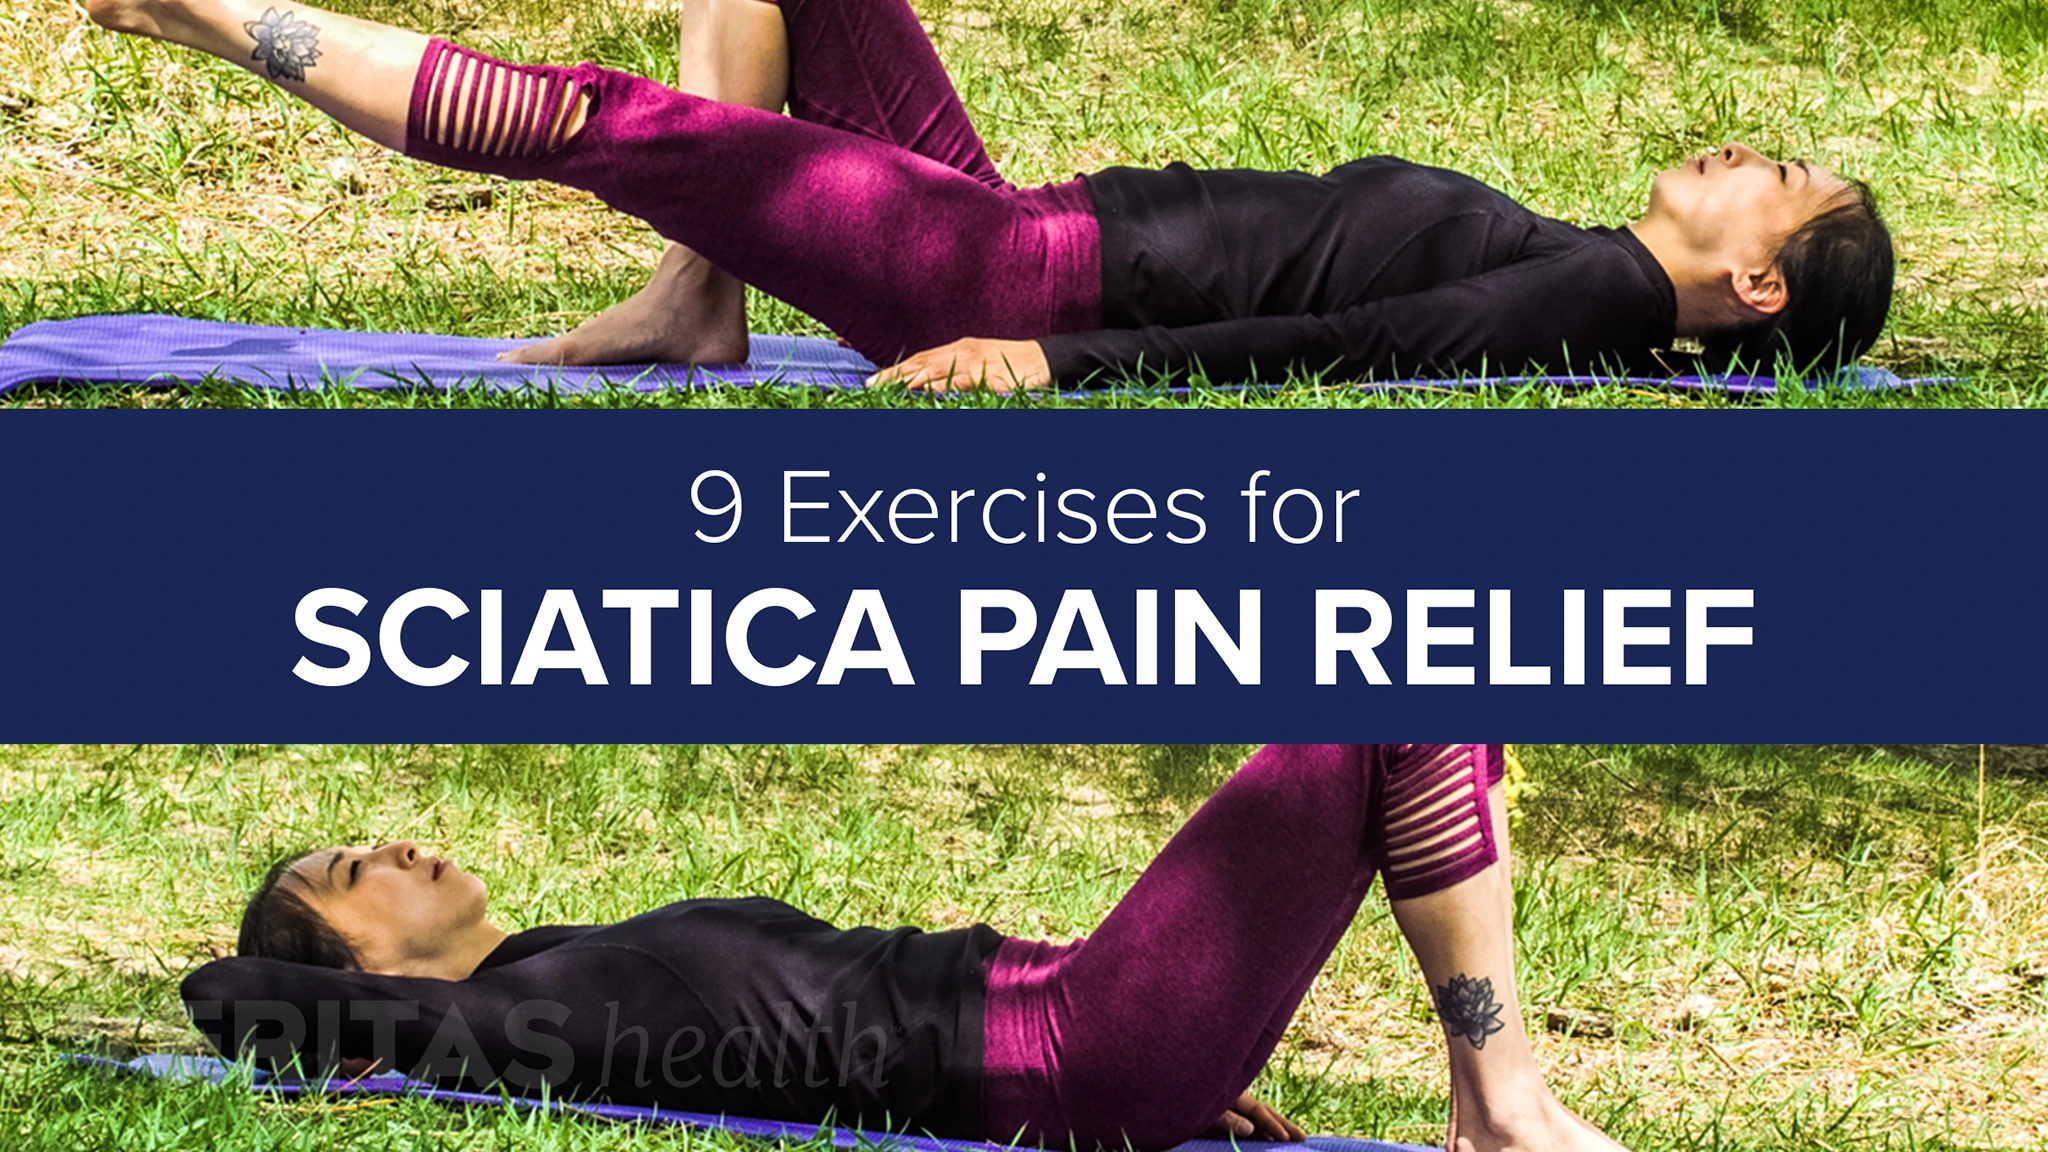 Sciatica Relief Workouts for Seniors: Simple Illustrated Exercises